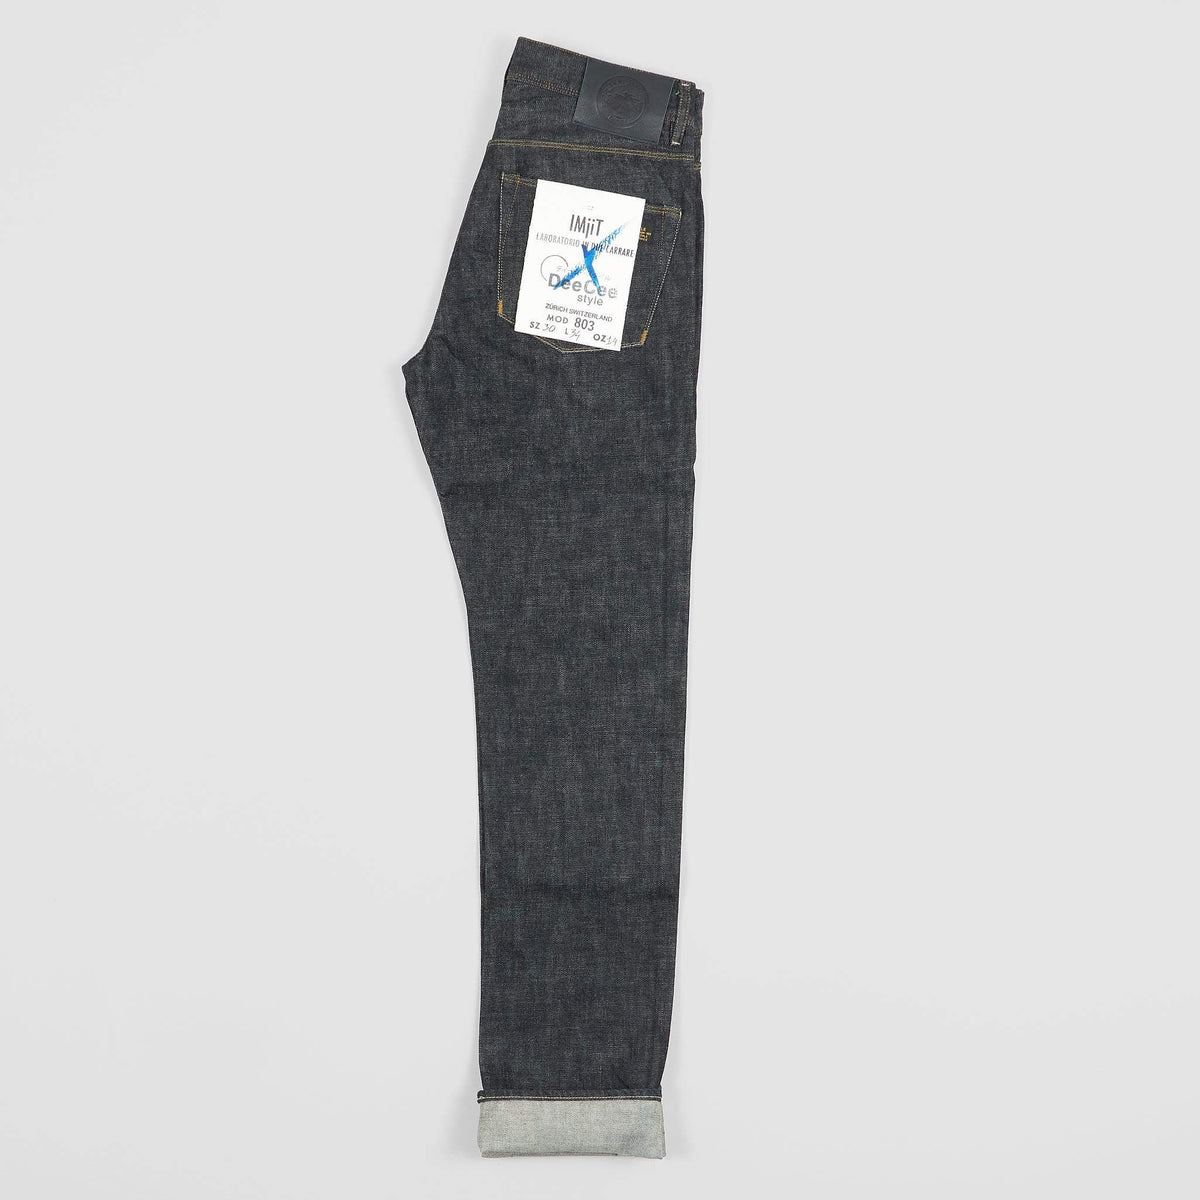 IMjiT x DeeCee style Regular Tapered Selvage Jeans